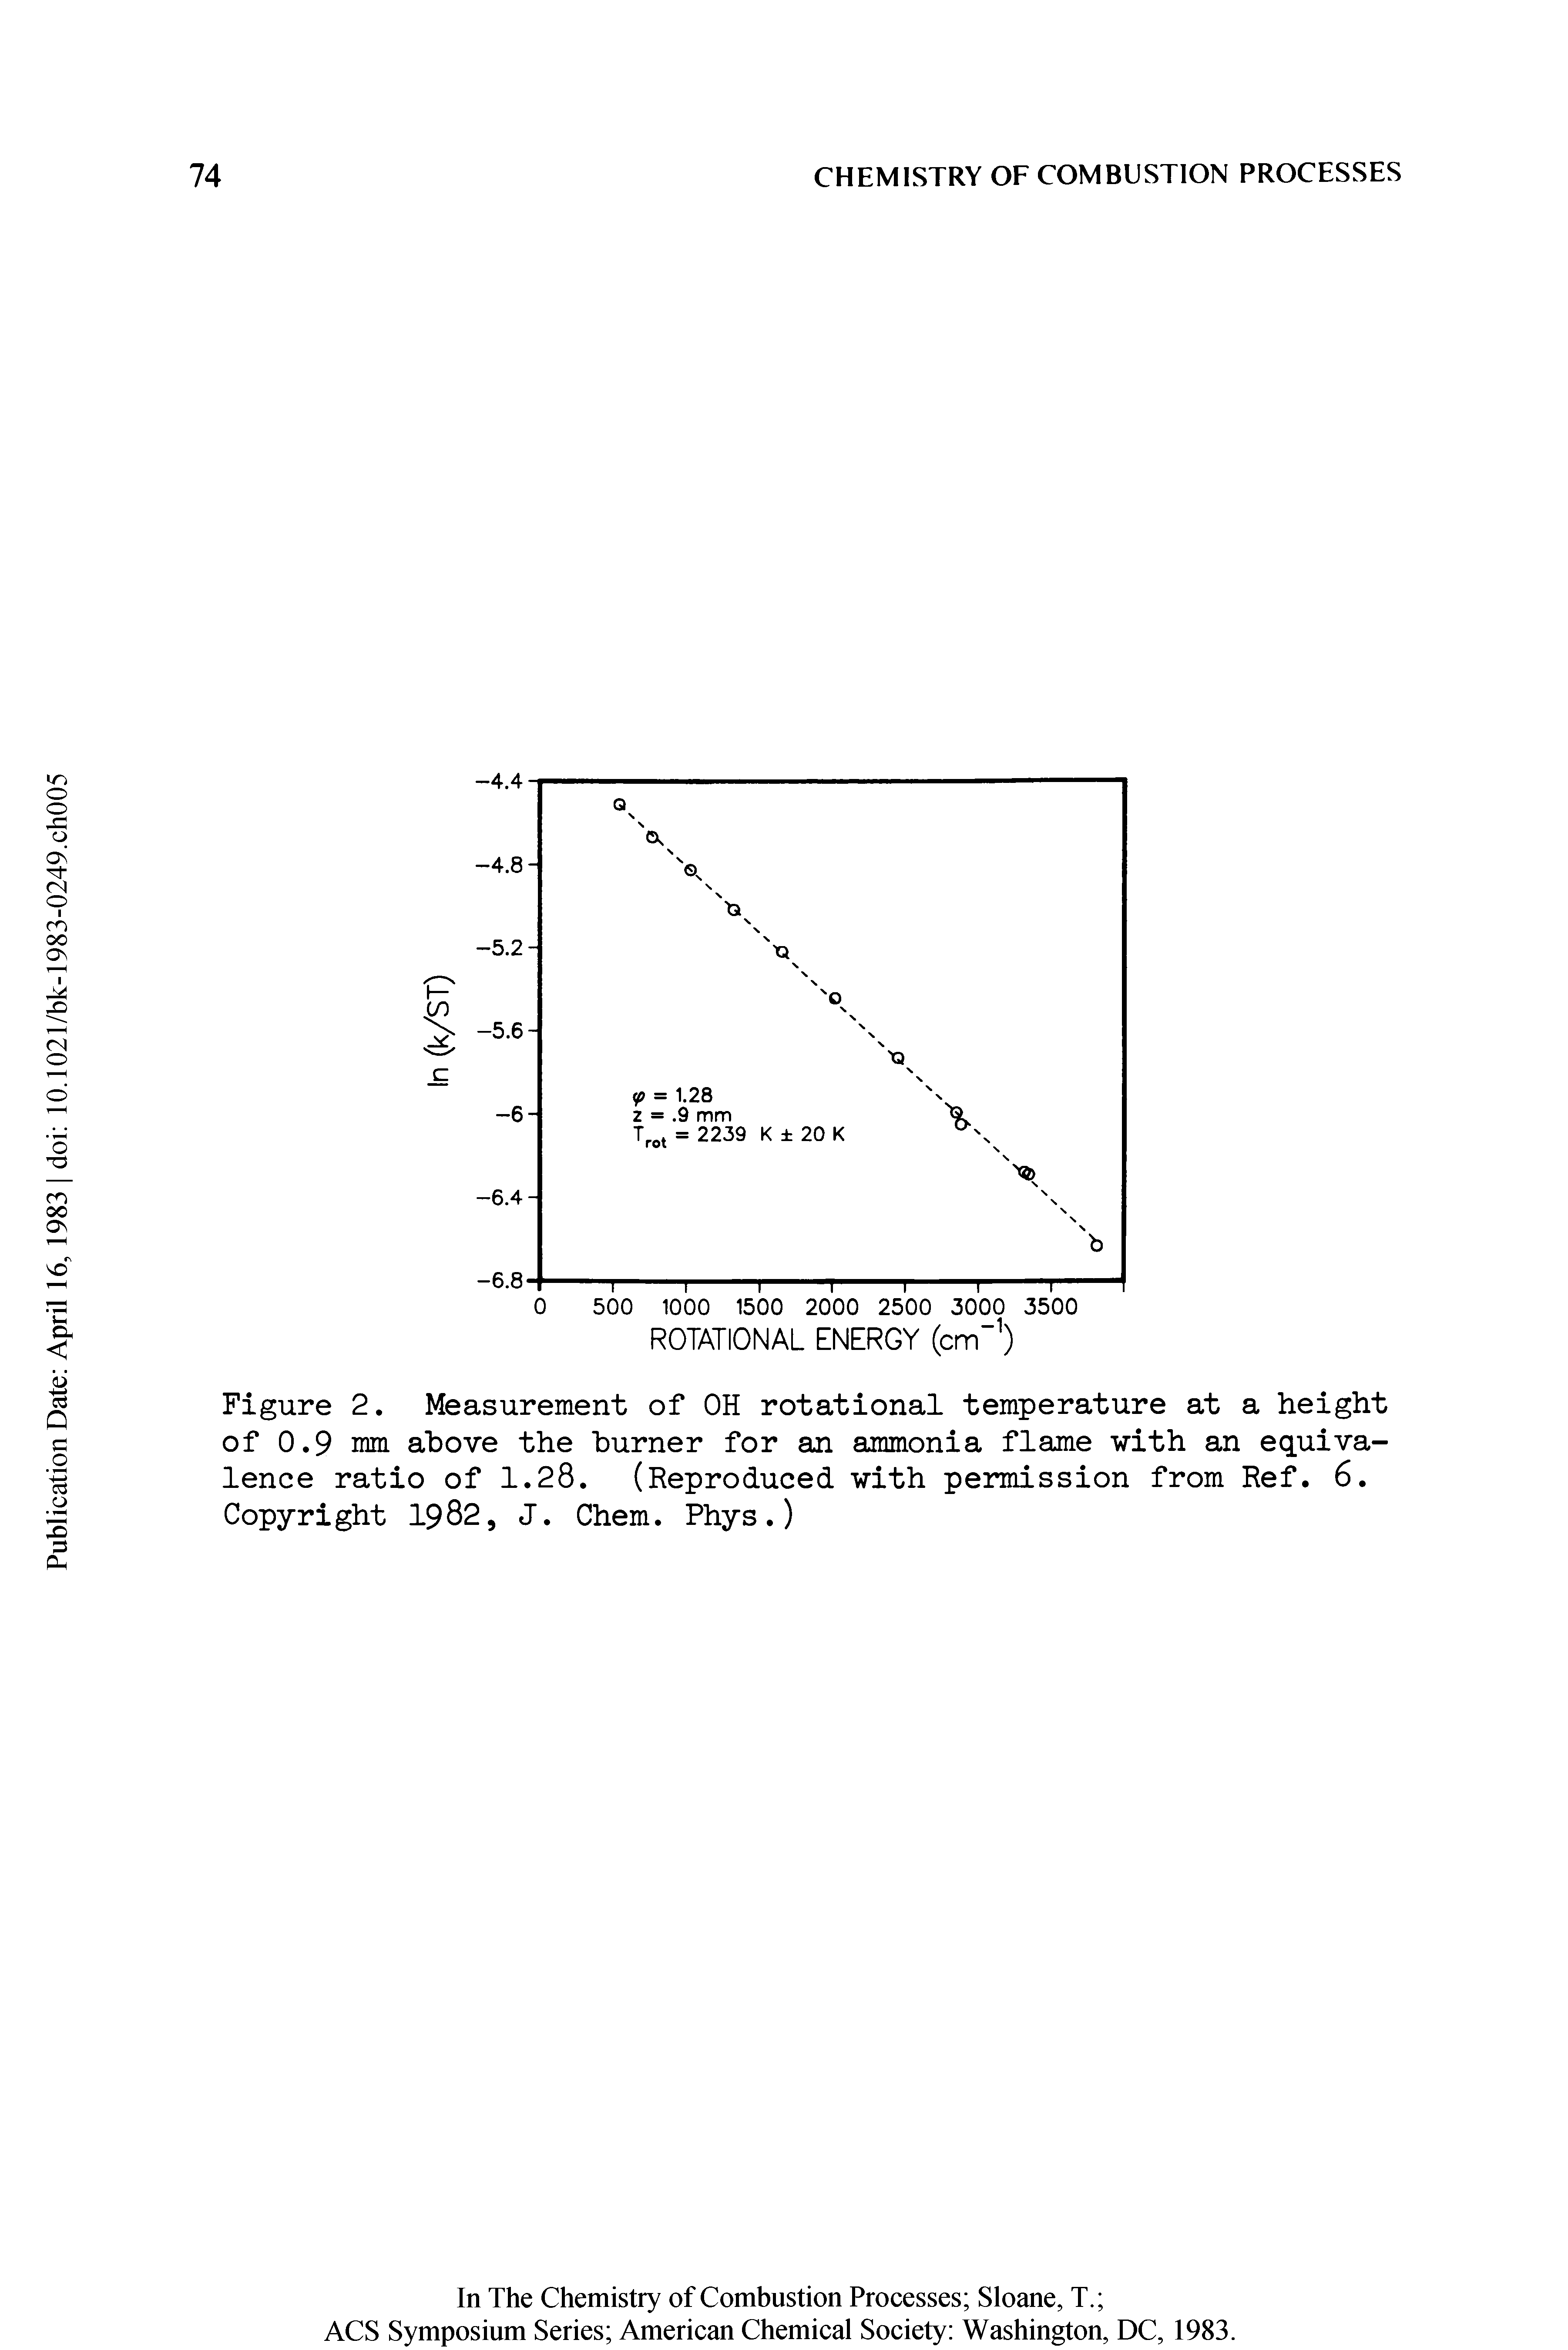 Figure 2. Measurement of OH rotational temperature at a height of 0.9 nm above the burner for an ammonia flame with an equivalence ratio of 1.28. (Reproduced with permission from Ref. 6. Copyright 1982, J. Chem. Phys.)...